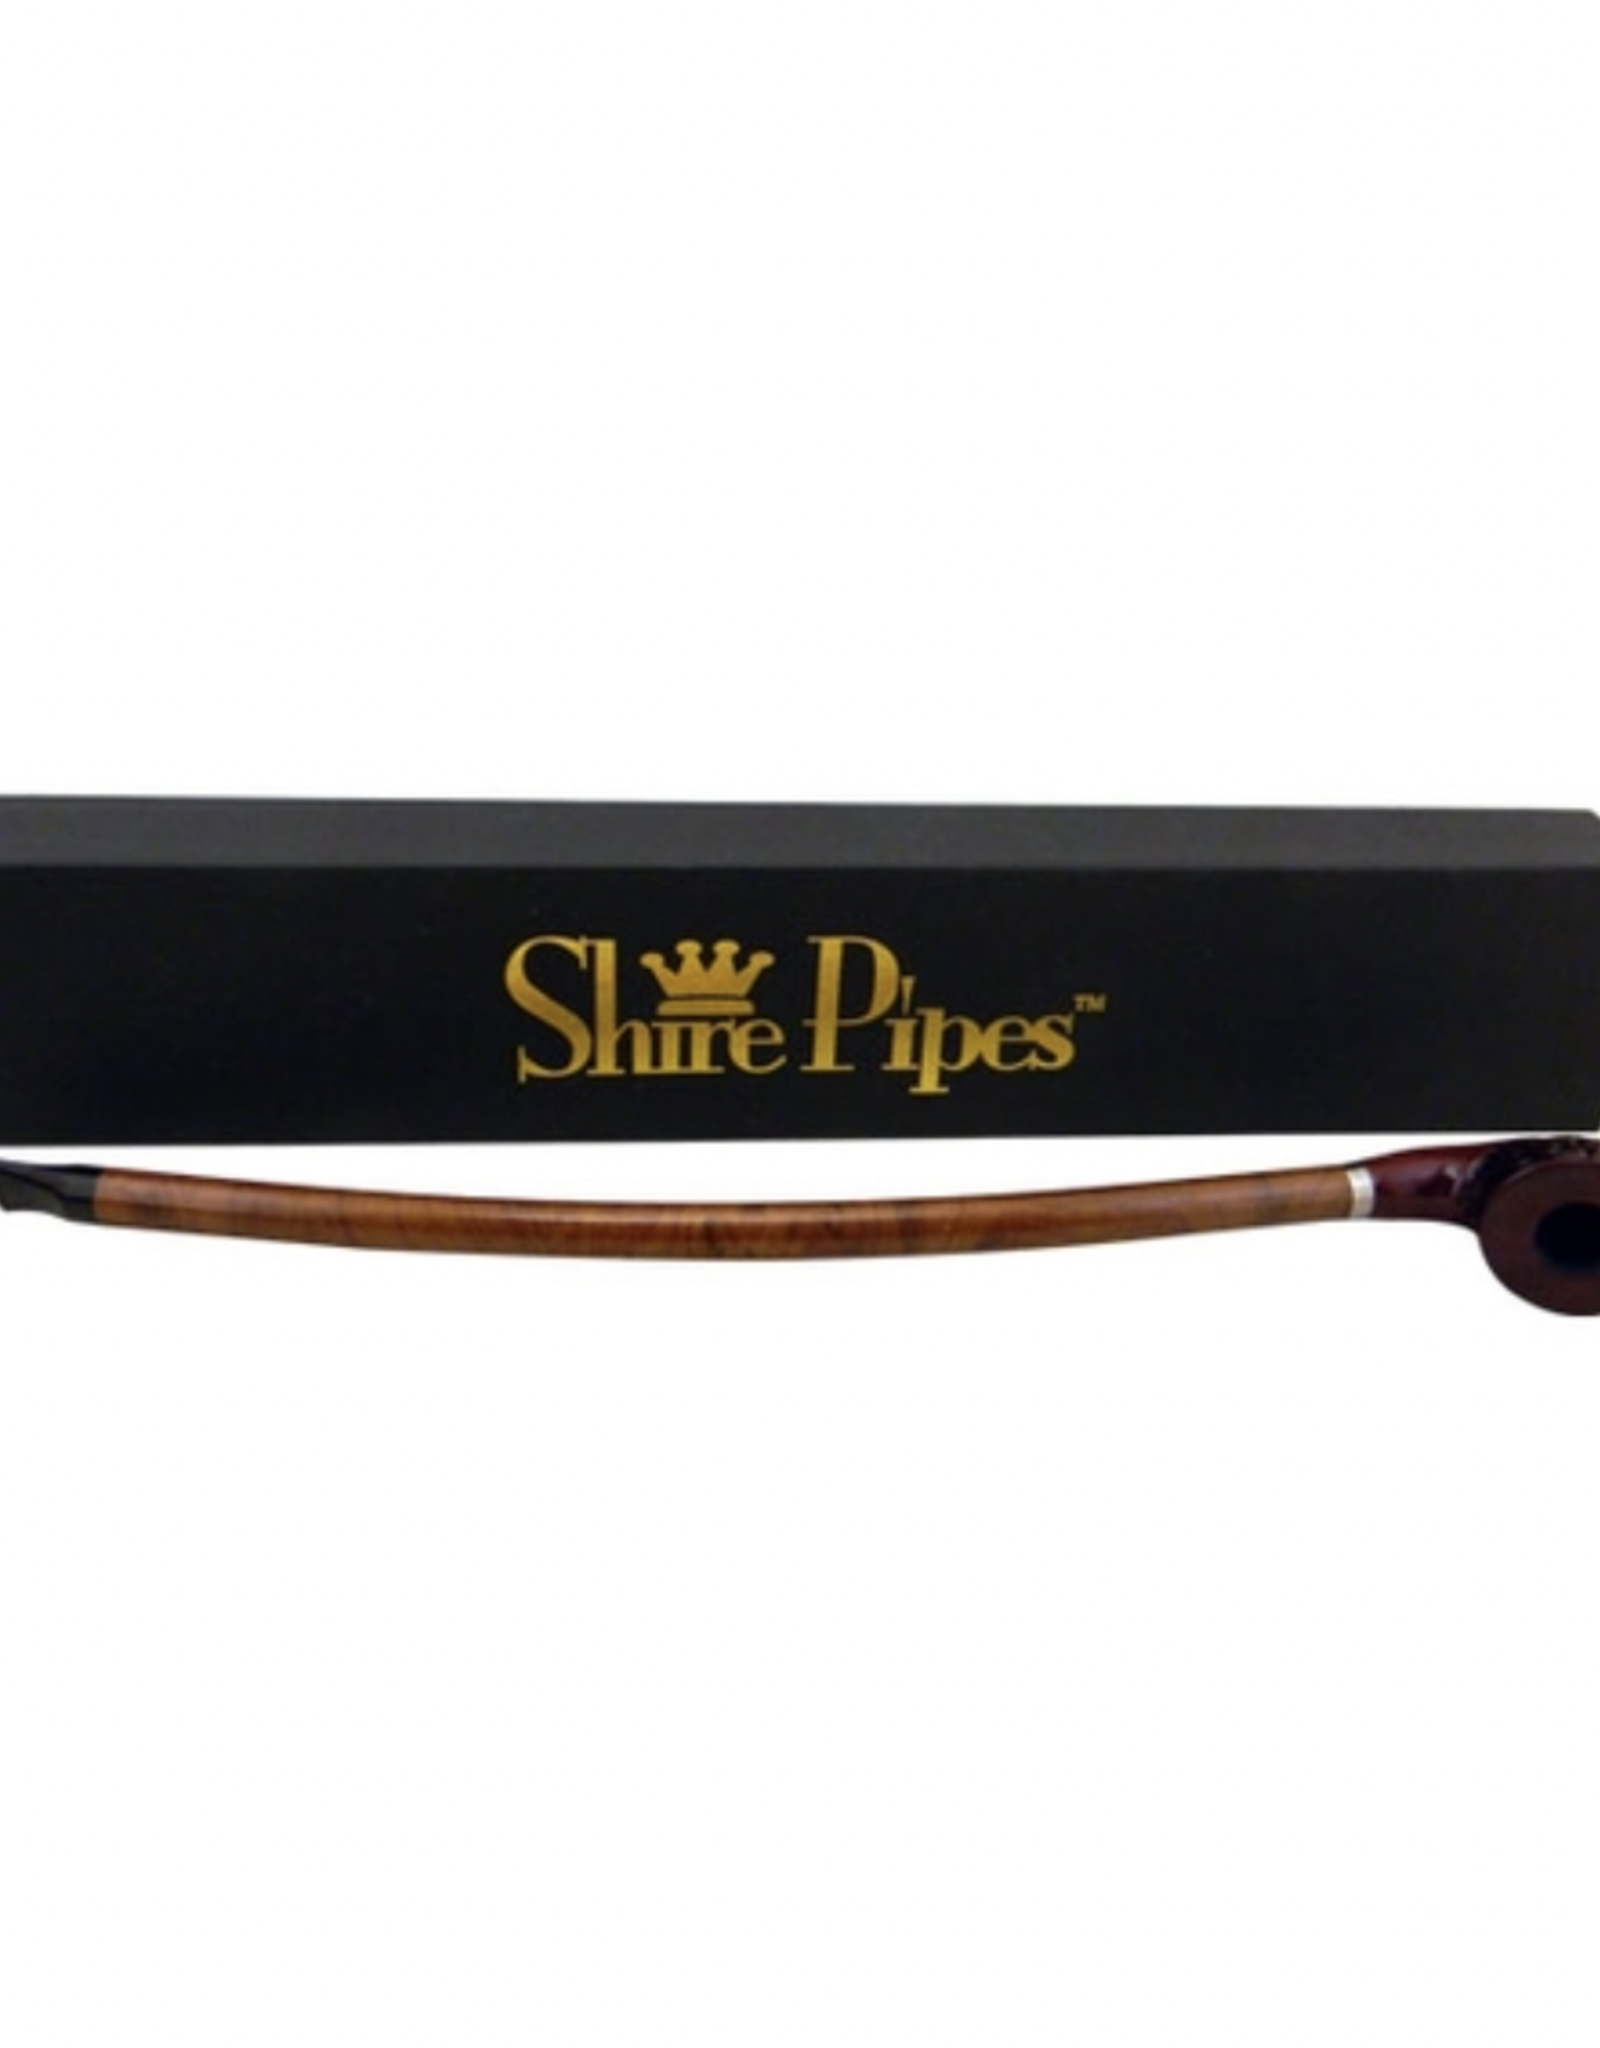 15" Curved Stem Engraved Rosewood Pipe by Shire Pipes